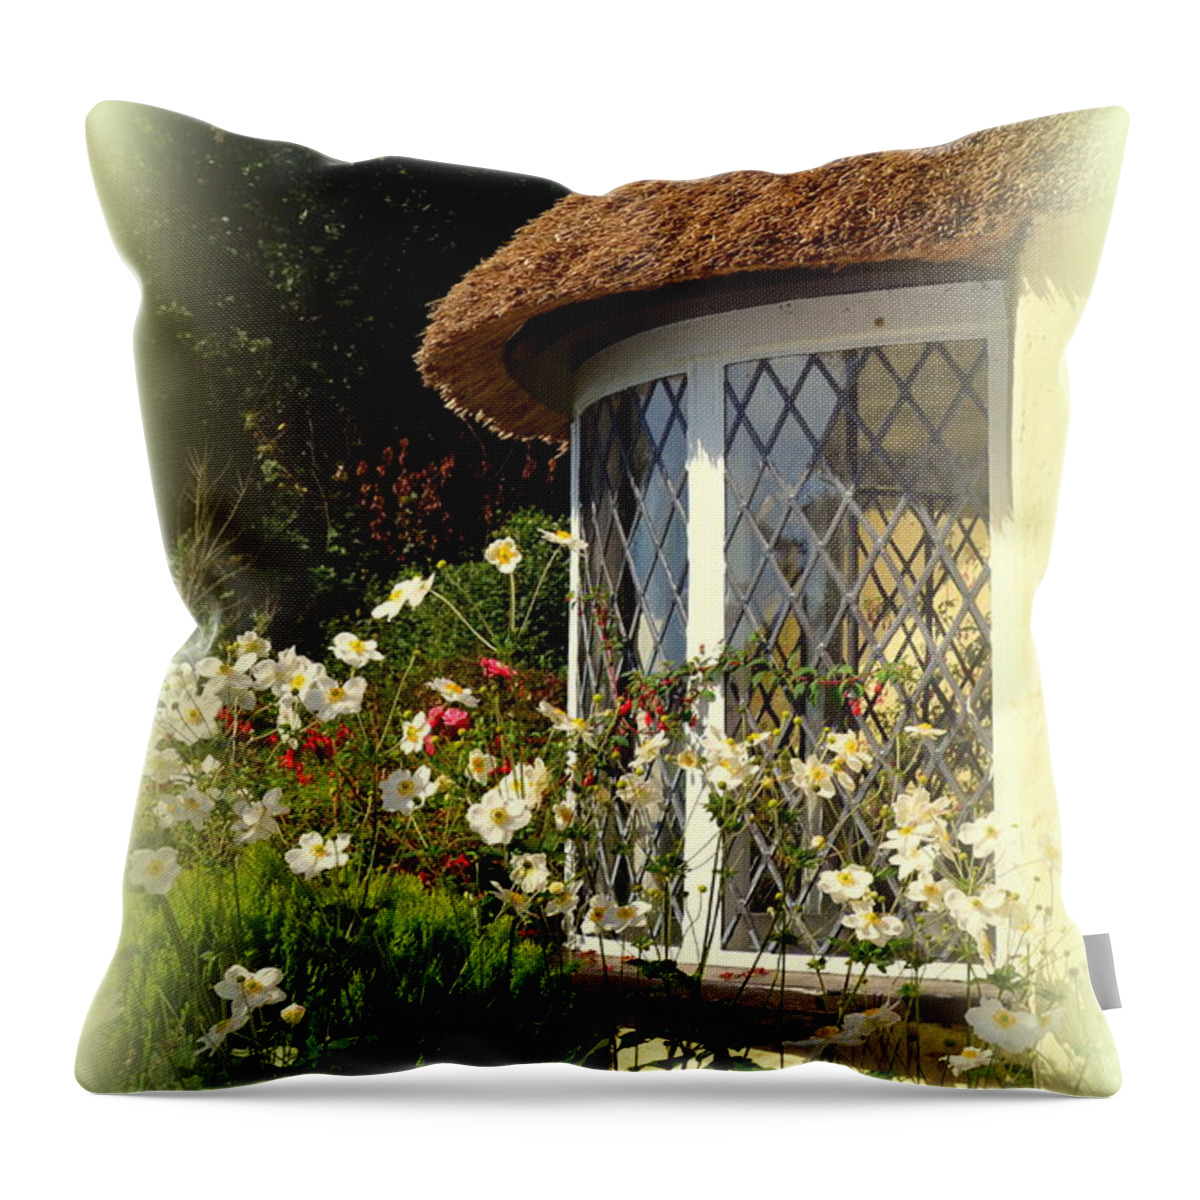 Selworthy Throw Pillow featuring the photograph Thatched Cottage Window by Carla Parris